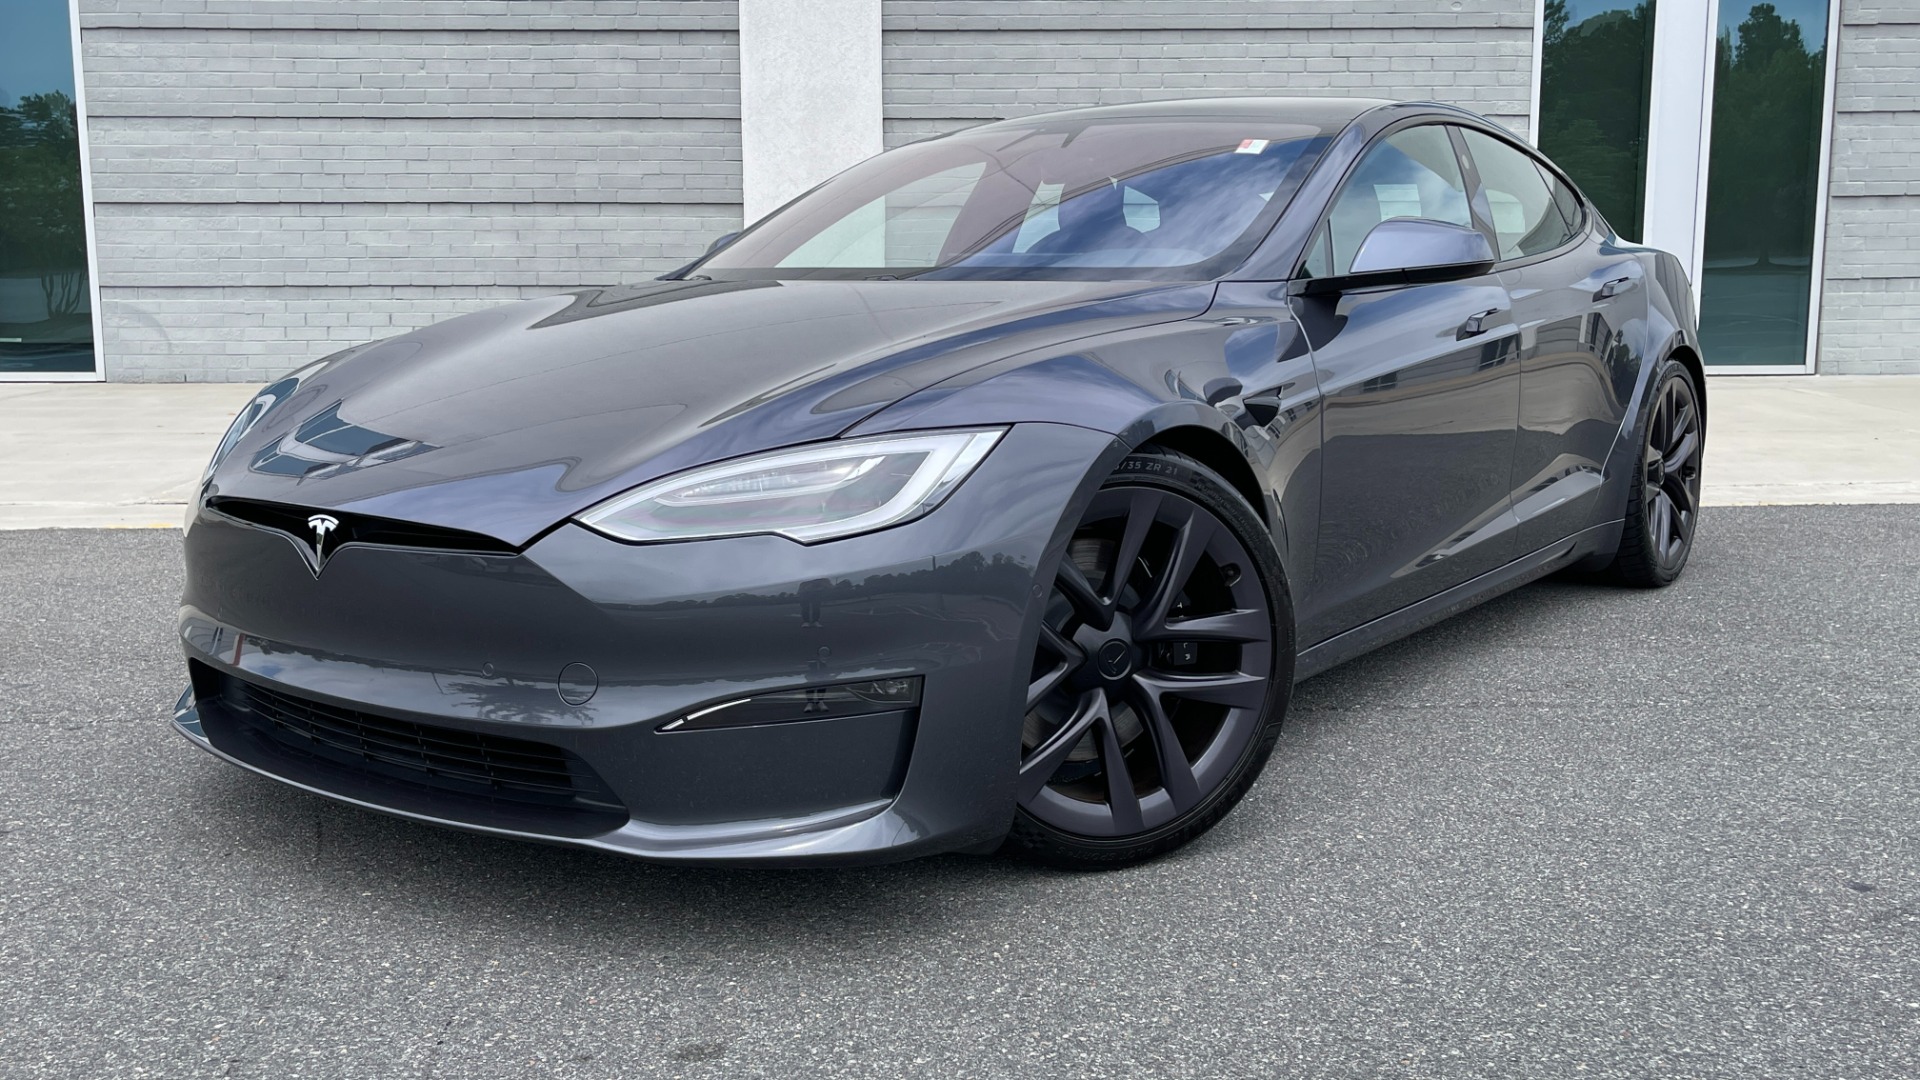 Used 2021 Tesla Model S Plaid / FULL SELF DRIVING / 21IN WHEELS / CARBON FIBER TRIM / PREMIUM CONNE for sale $105,000 at Formula Imports in Charlotte NC 28227 48